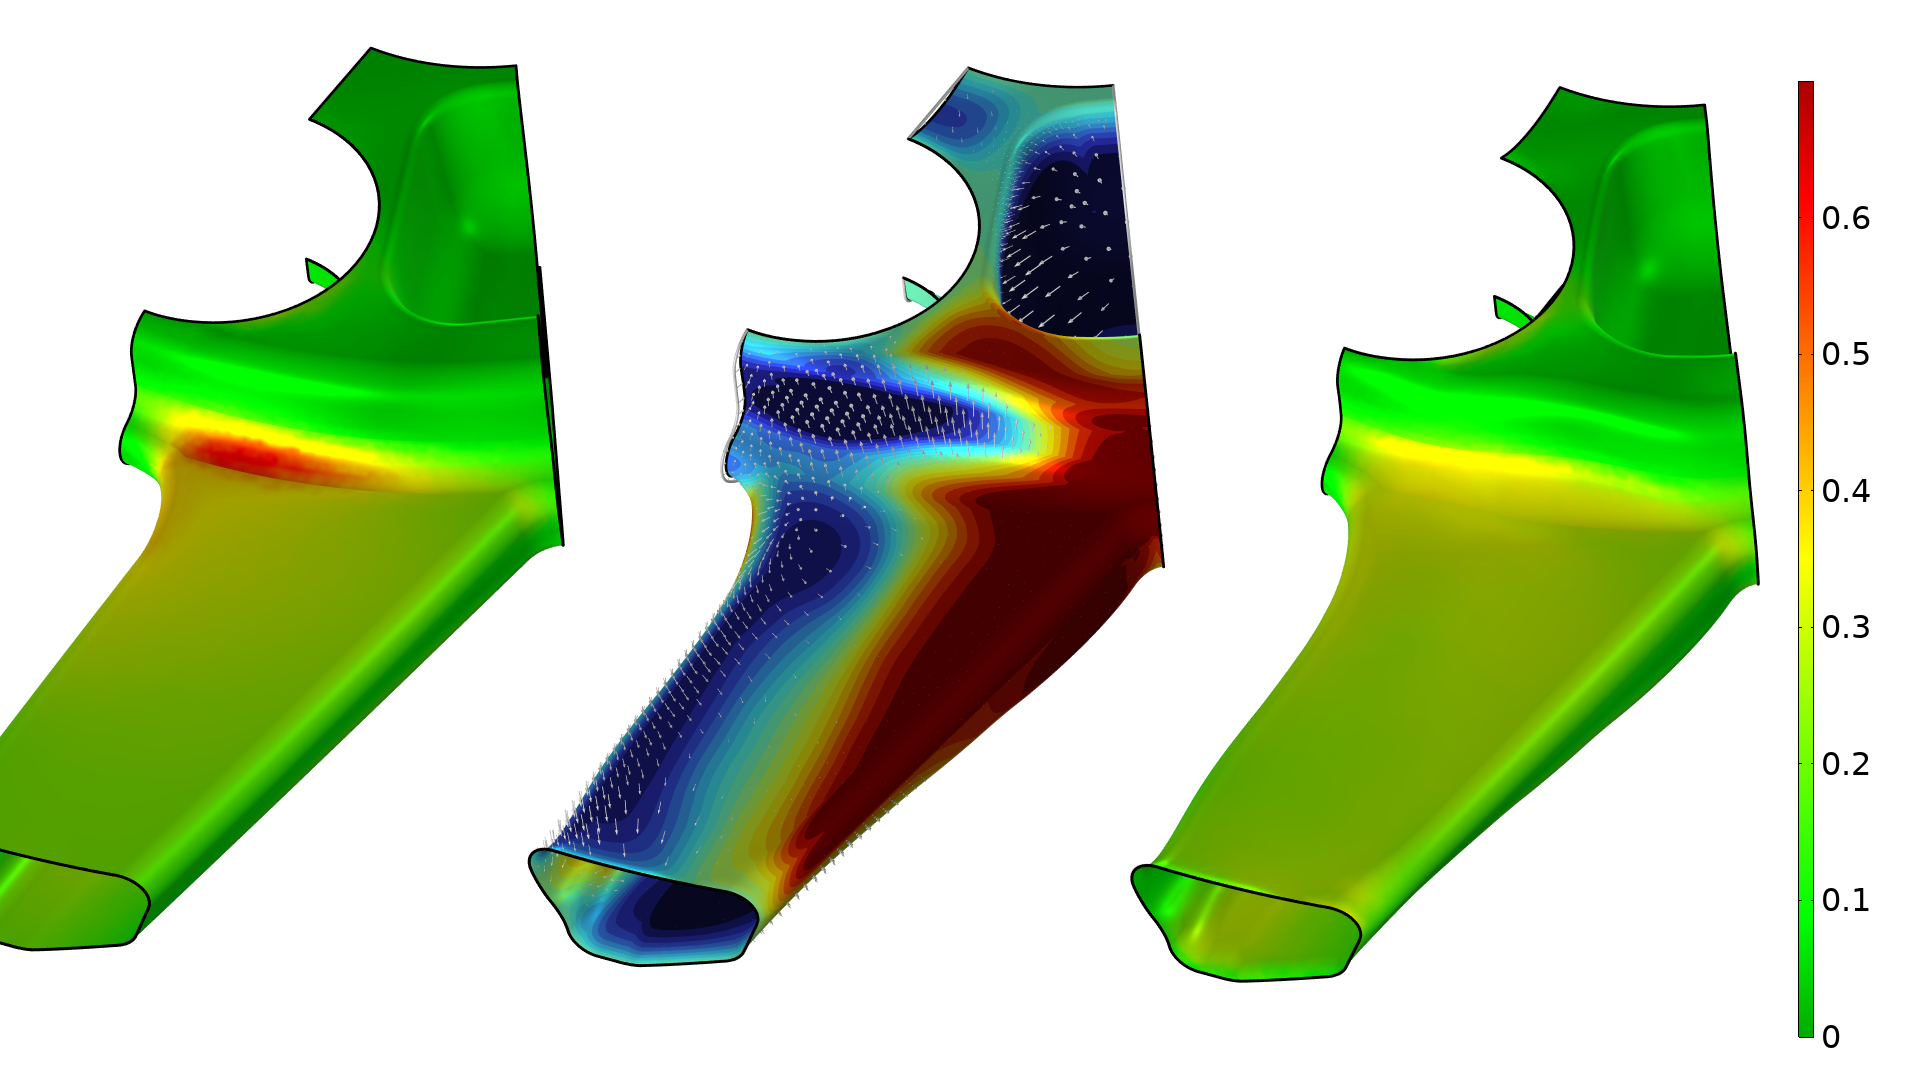 Two close-up plots of a cutout of the wheel rim model show the decrease in the fatigue usage factor between the initial fillet design (left) and the shape-optimized design (right). In the middle, a plot illustrates the shape change, with a color scale corresponding to areas where material has been added or removed.